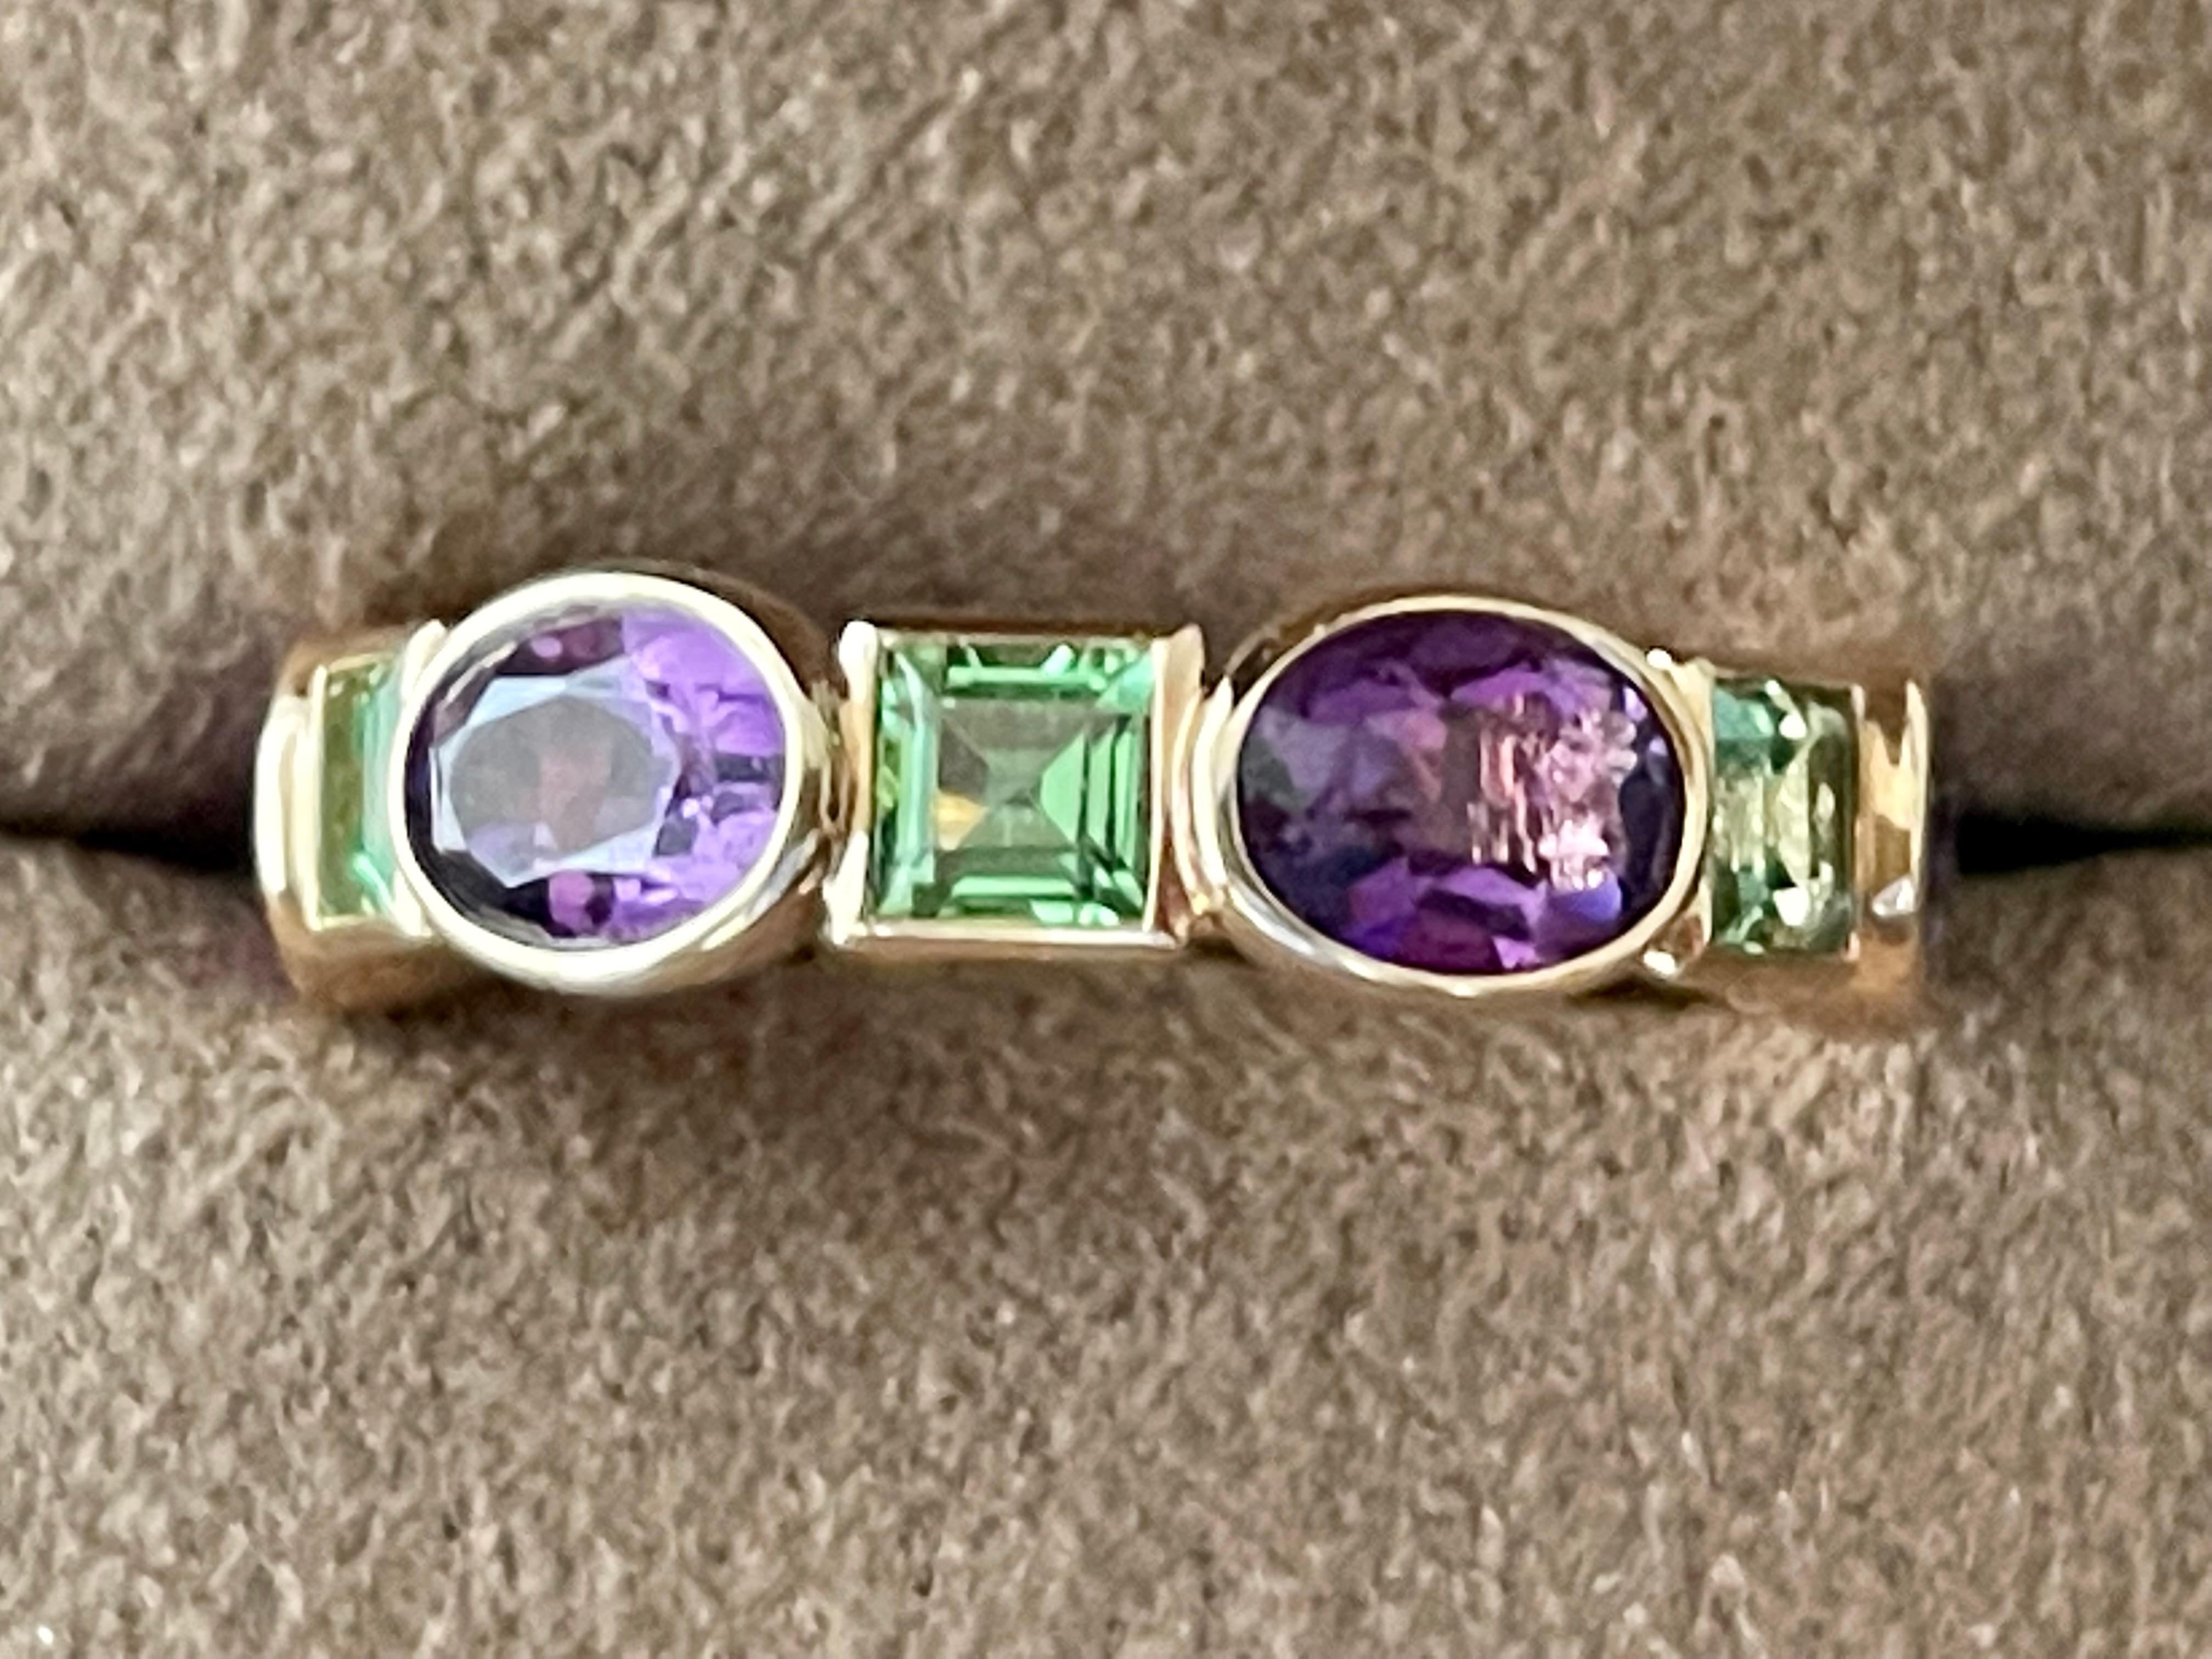 Modern and solid 18 K rose Gold eternity band featuring 6 oval bezel set Amethyst with a total weight of 4.33 ct and 5 square cut Tsavorites weighing 2.38 ct. 
The ring is currently size 55/15 ( american ring size 7.5) but can be resized smaller to